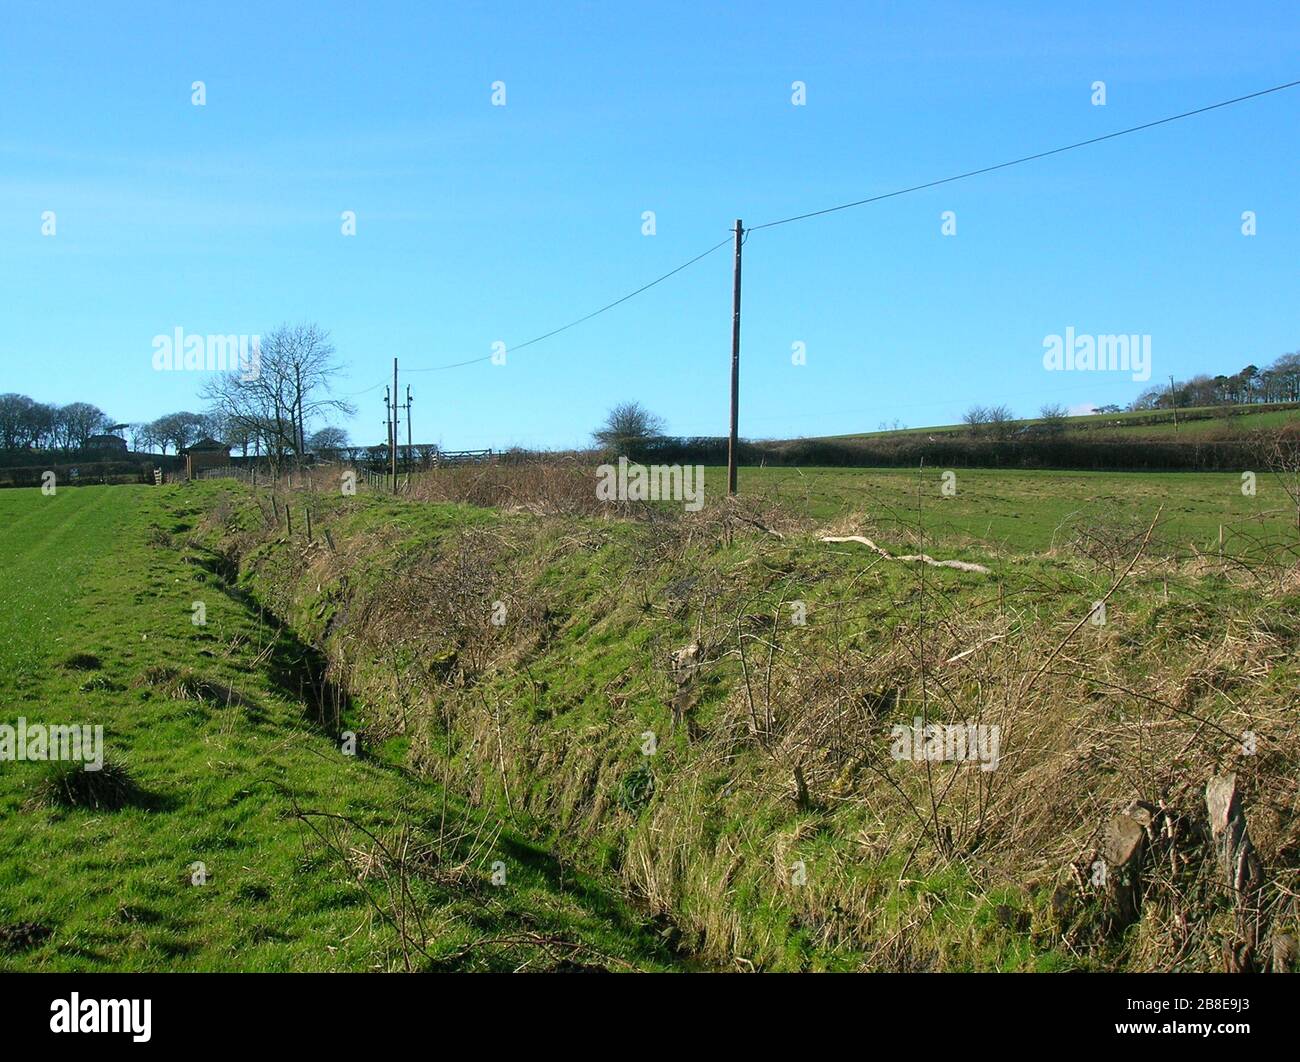 'English: A view of the embankment of the incline plain Monkcastle fireclay mine railway. Dalry, Ayrshire, Scotland.; 8 March 0004; self-madeTransferred from en.wikipedia; Rosser (talk); ' Stock Photo